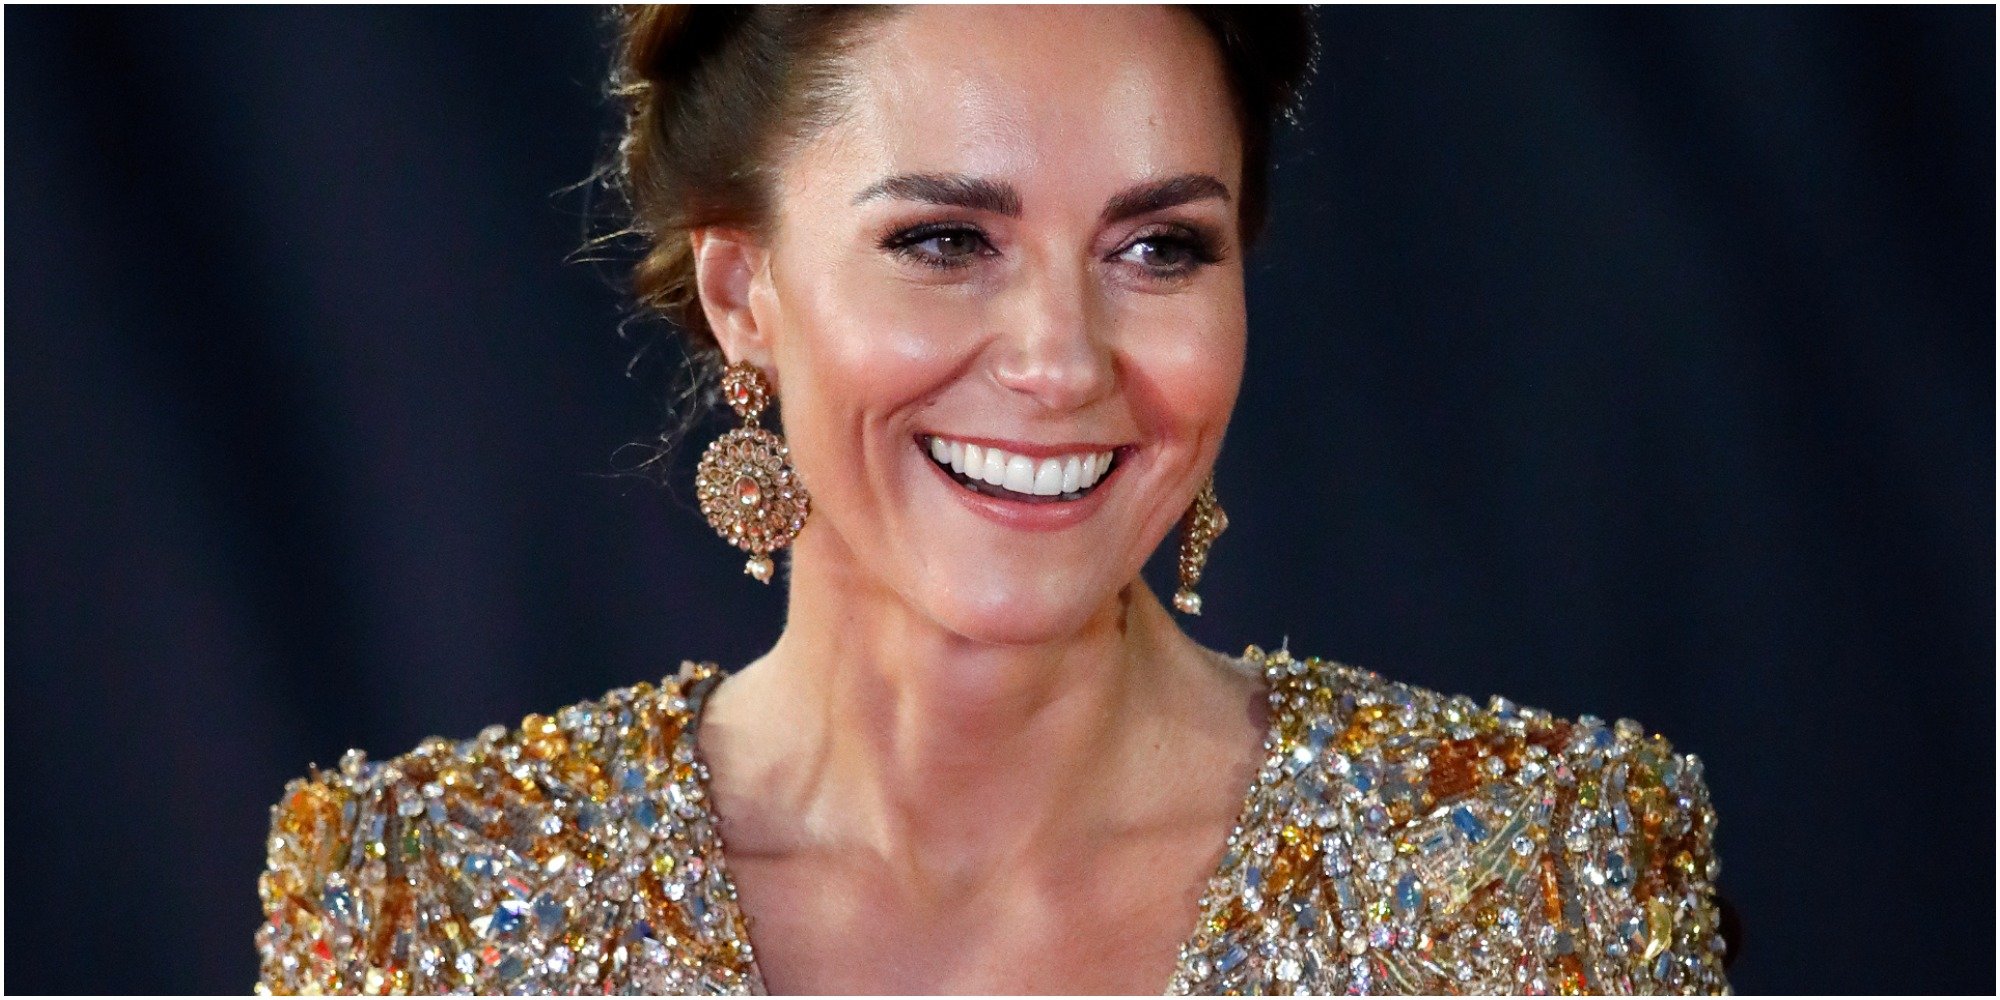 Kate Middleton wore a showstopping $5,000 gown to the premiere of the new James Bond film.